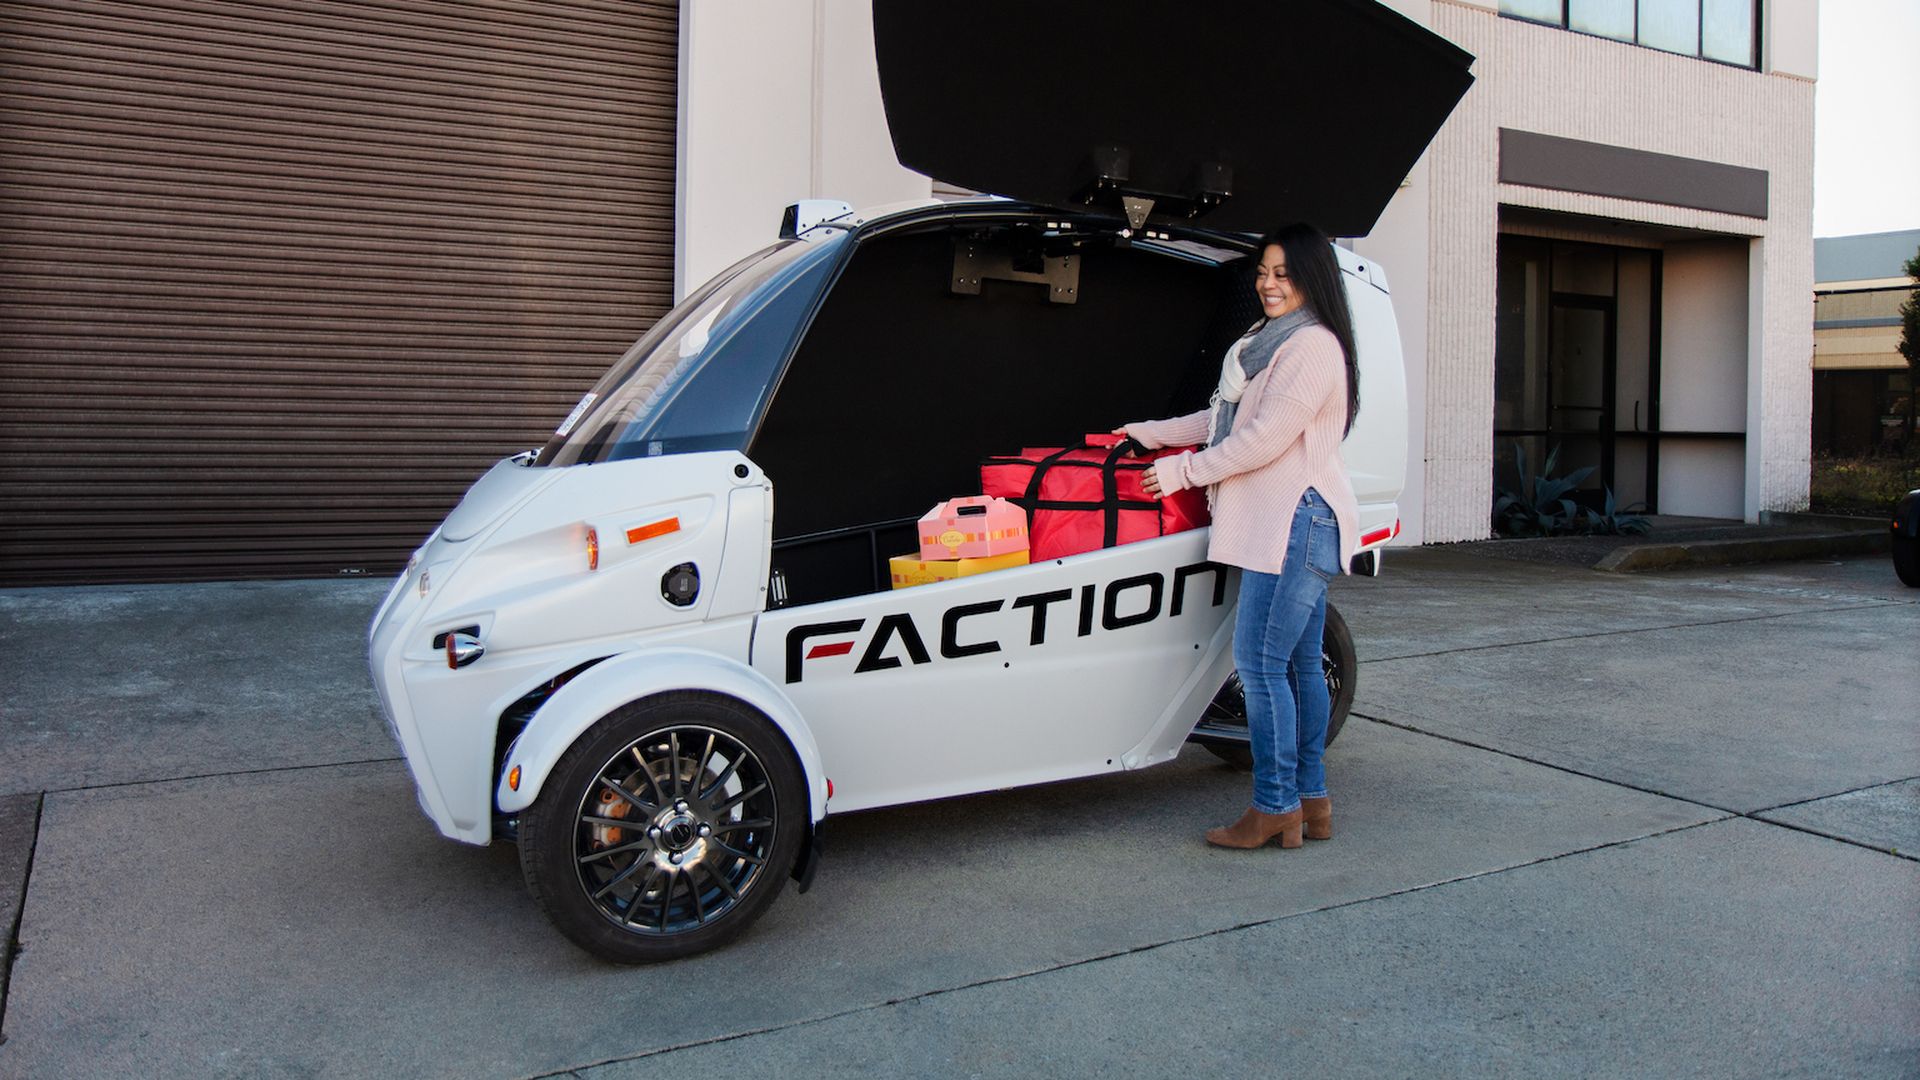 An electric driverless lightweight vehicle from startup Faction.